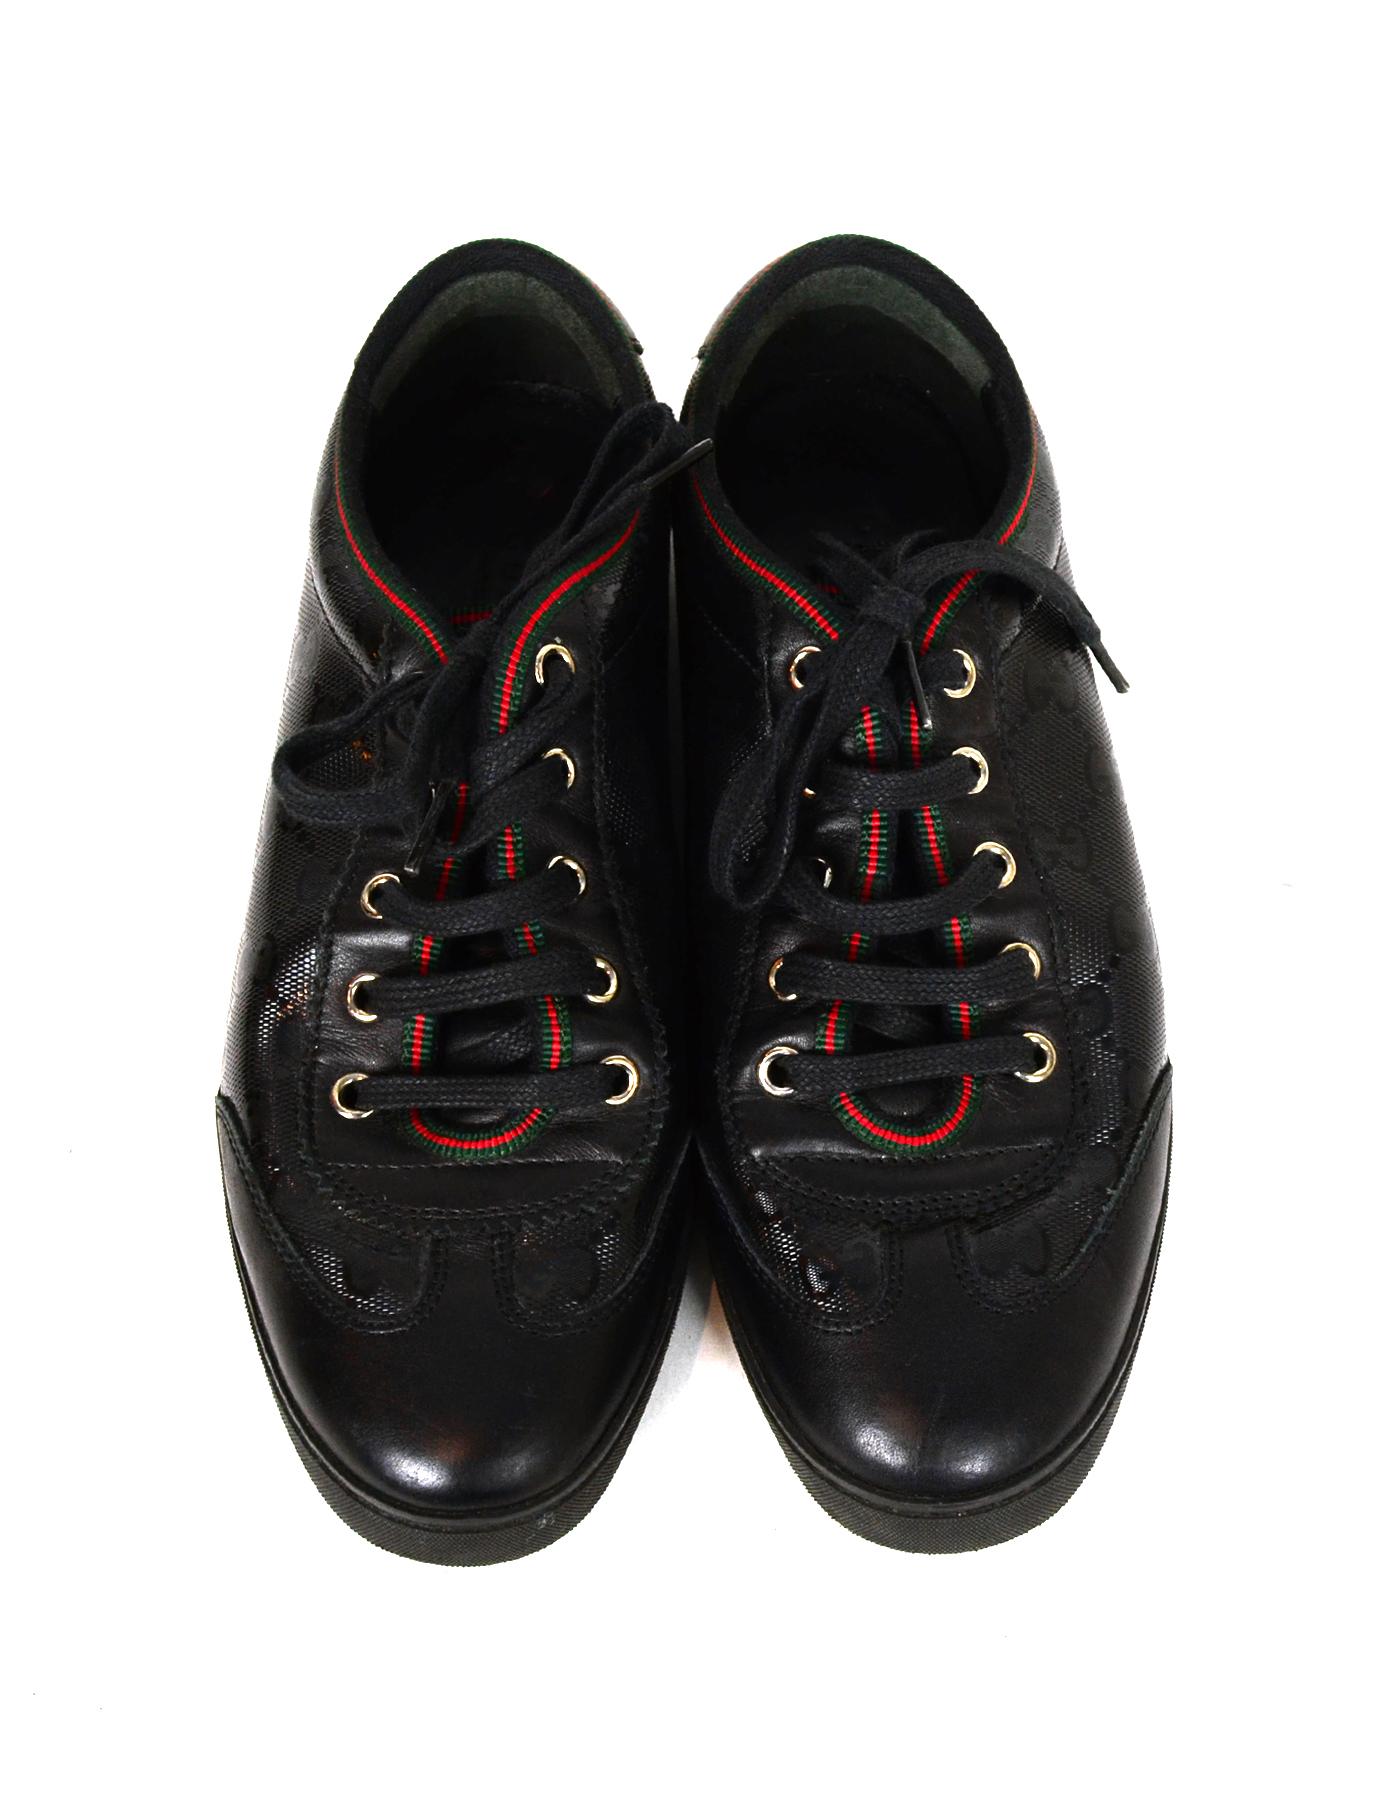 Gucci Black Monogram Sneakers w/ Leather Trim sz 36.5 In Excellent Condition For Sale In New York, NY